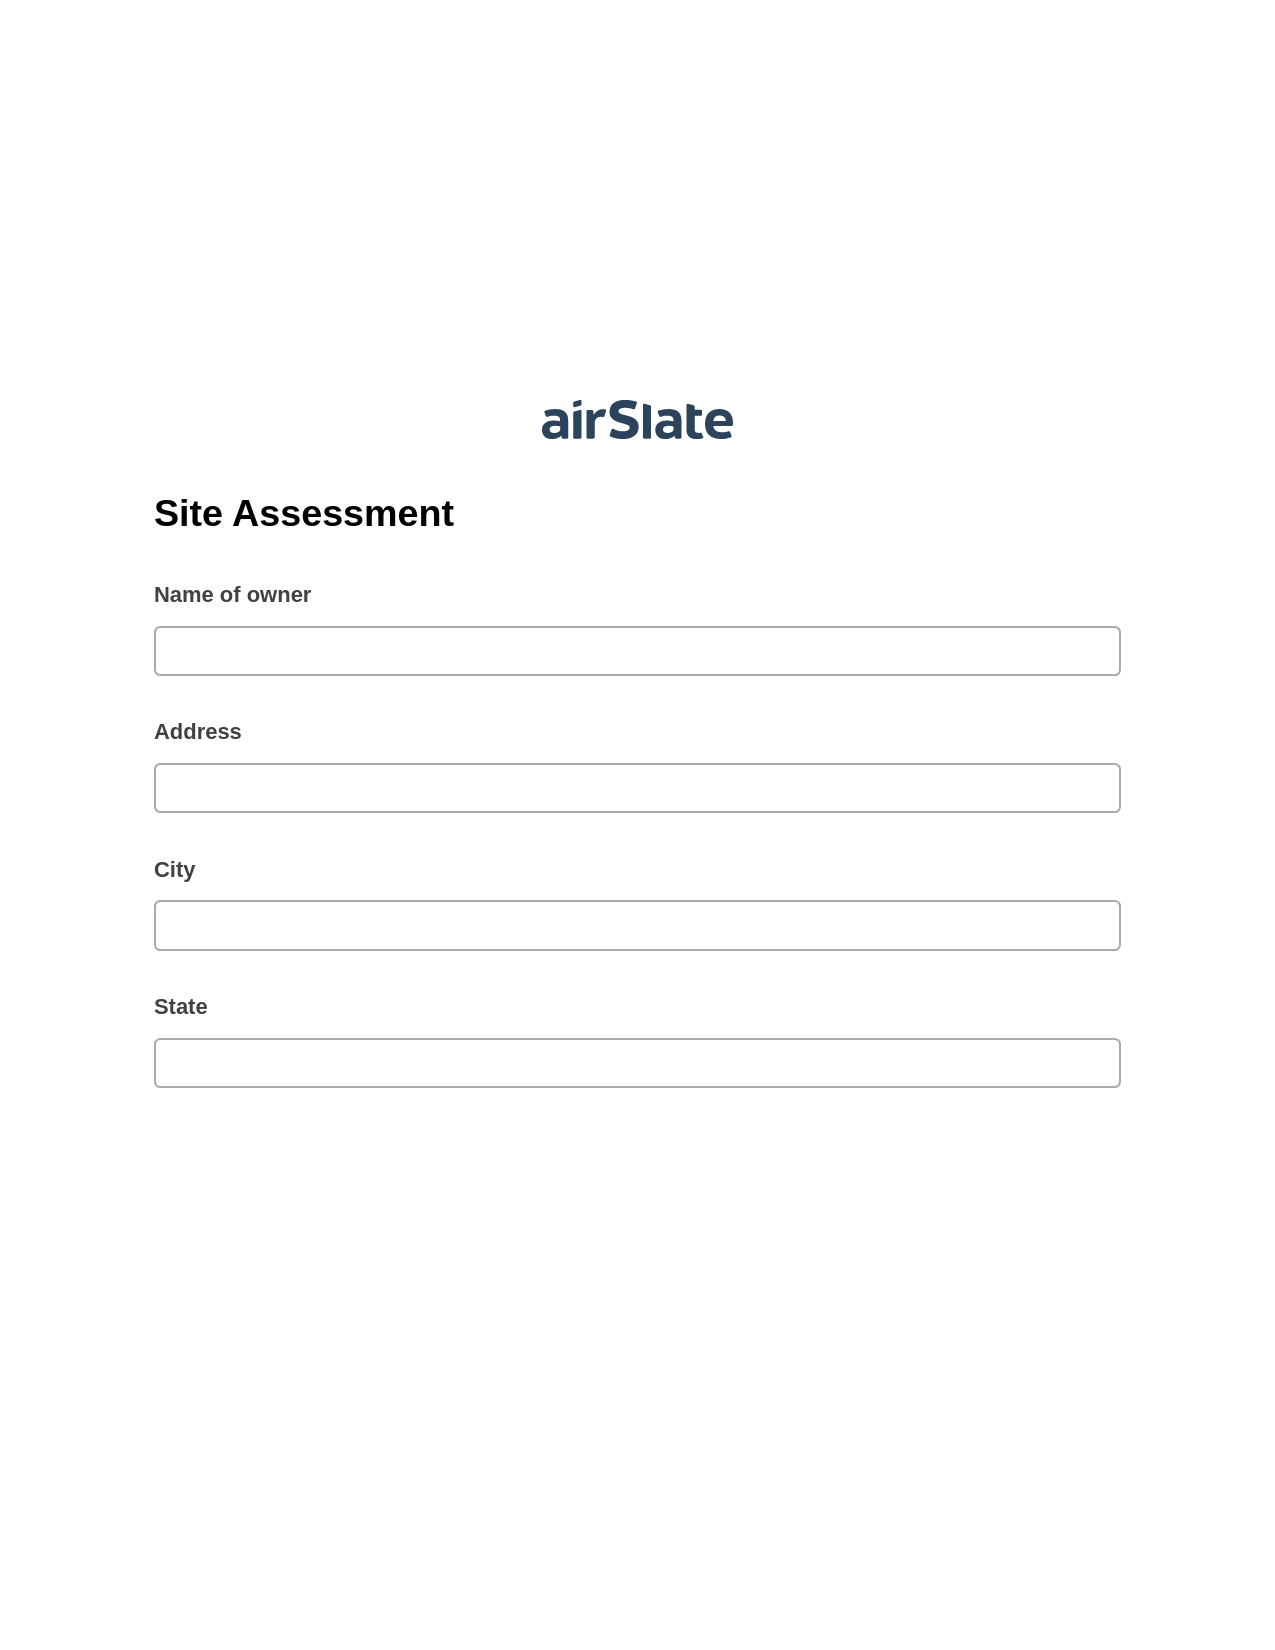 Site Assessment Pre-fill Slate from MS Dynamics 365 Records Bot, Invoke Salesforce Process Bot, Export to Smartsheet